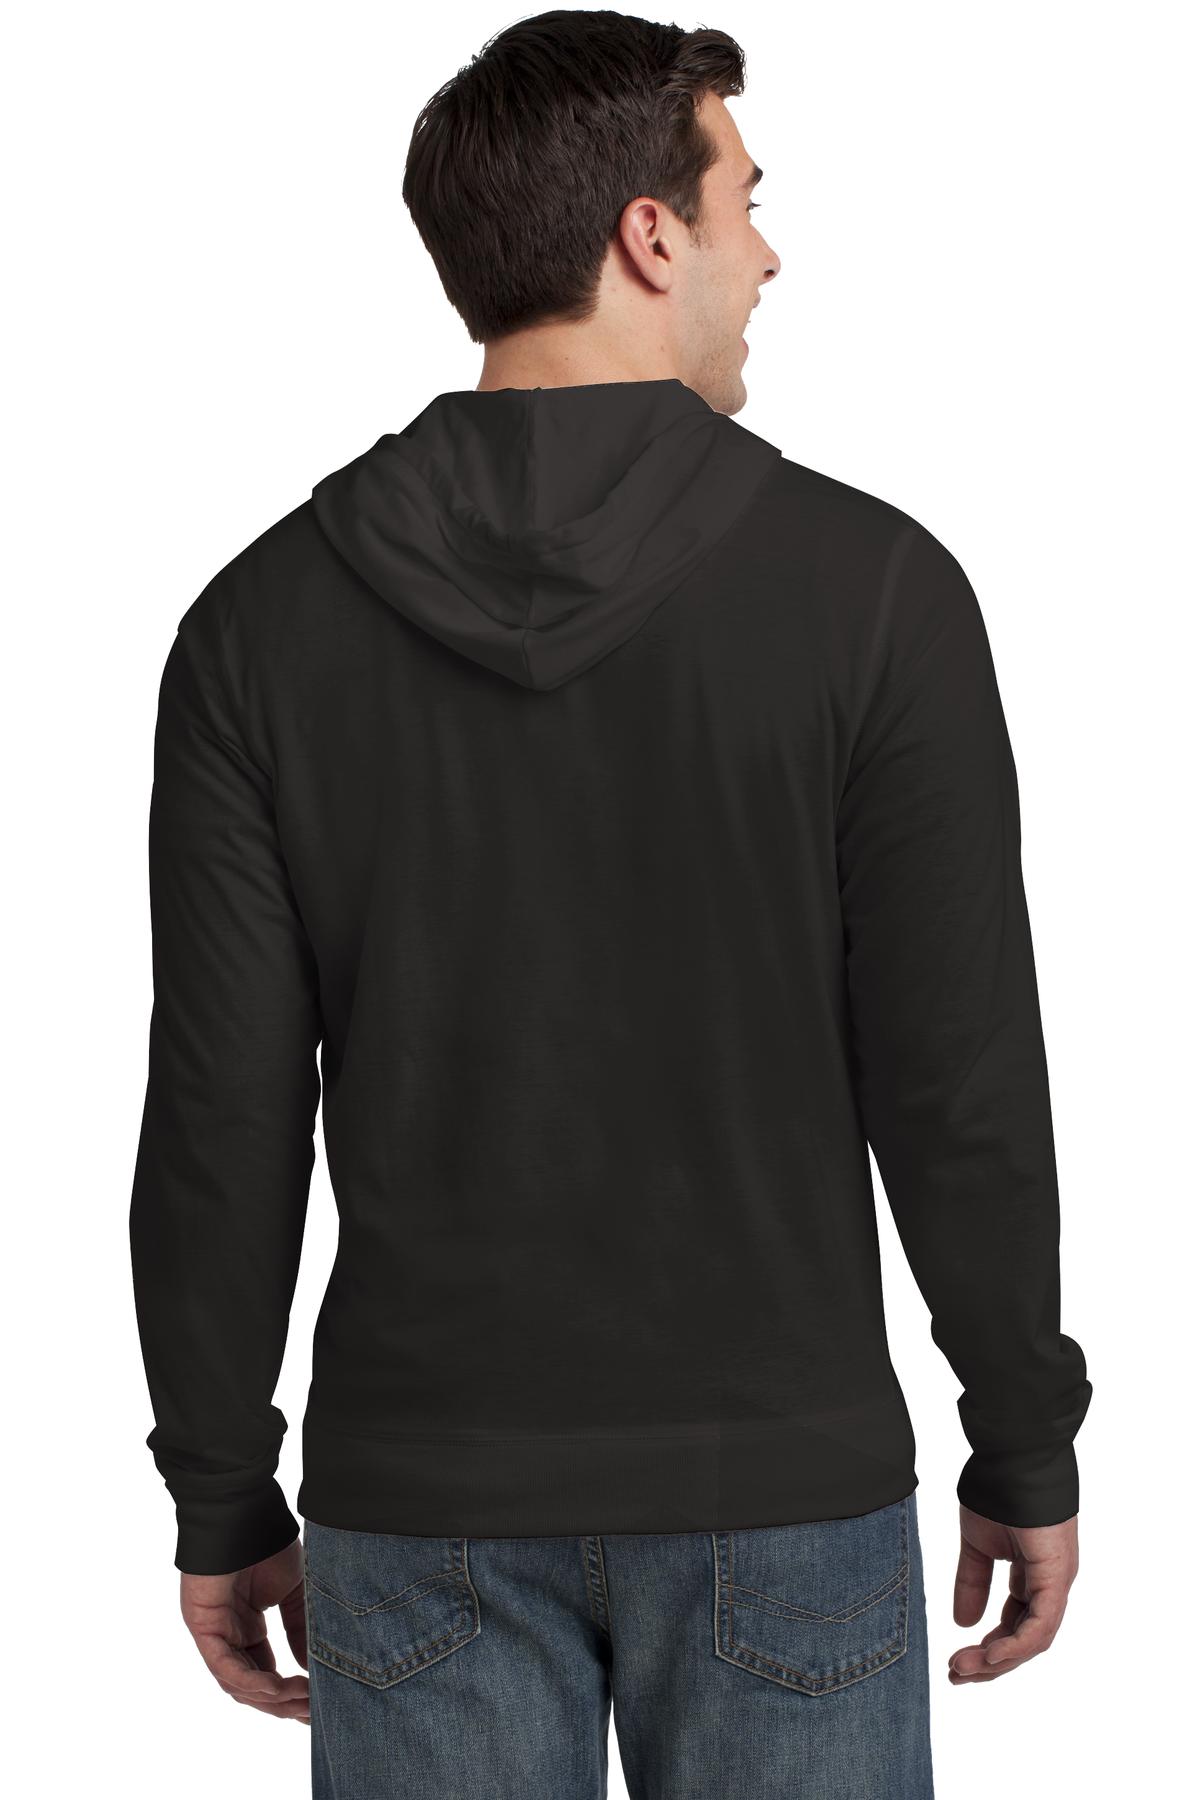 District Young Mens Jersey Full Zip Hoodie-L (Black) - image 2 of 6